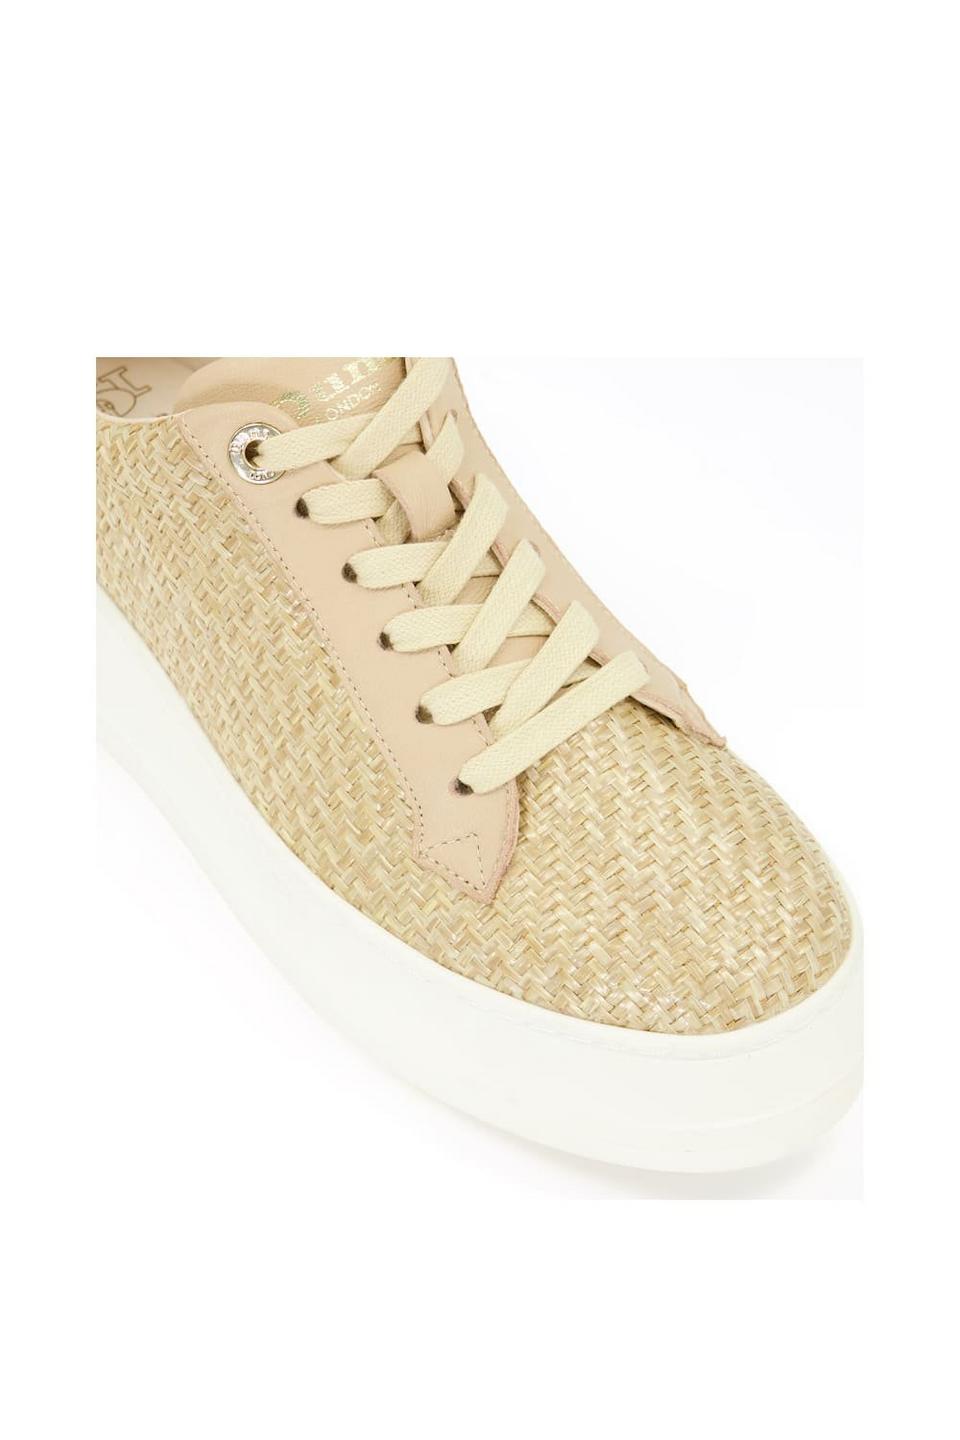 Trainers | 'Episode' Trainers | Dune London